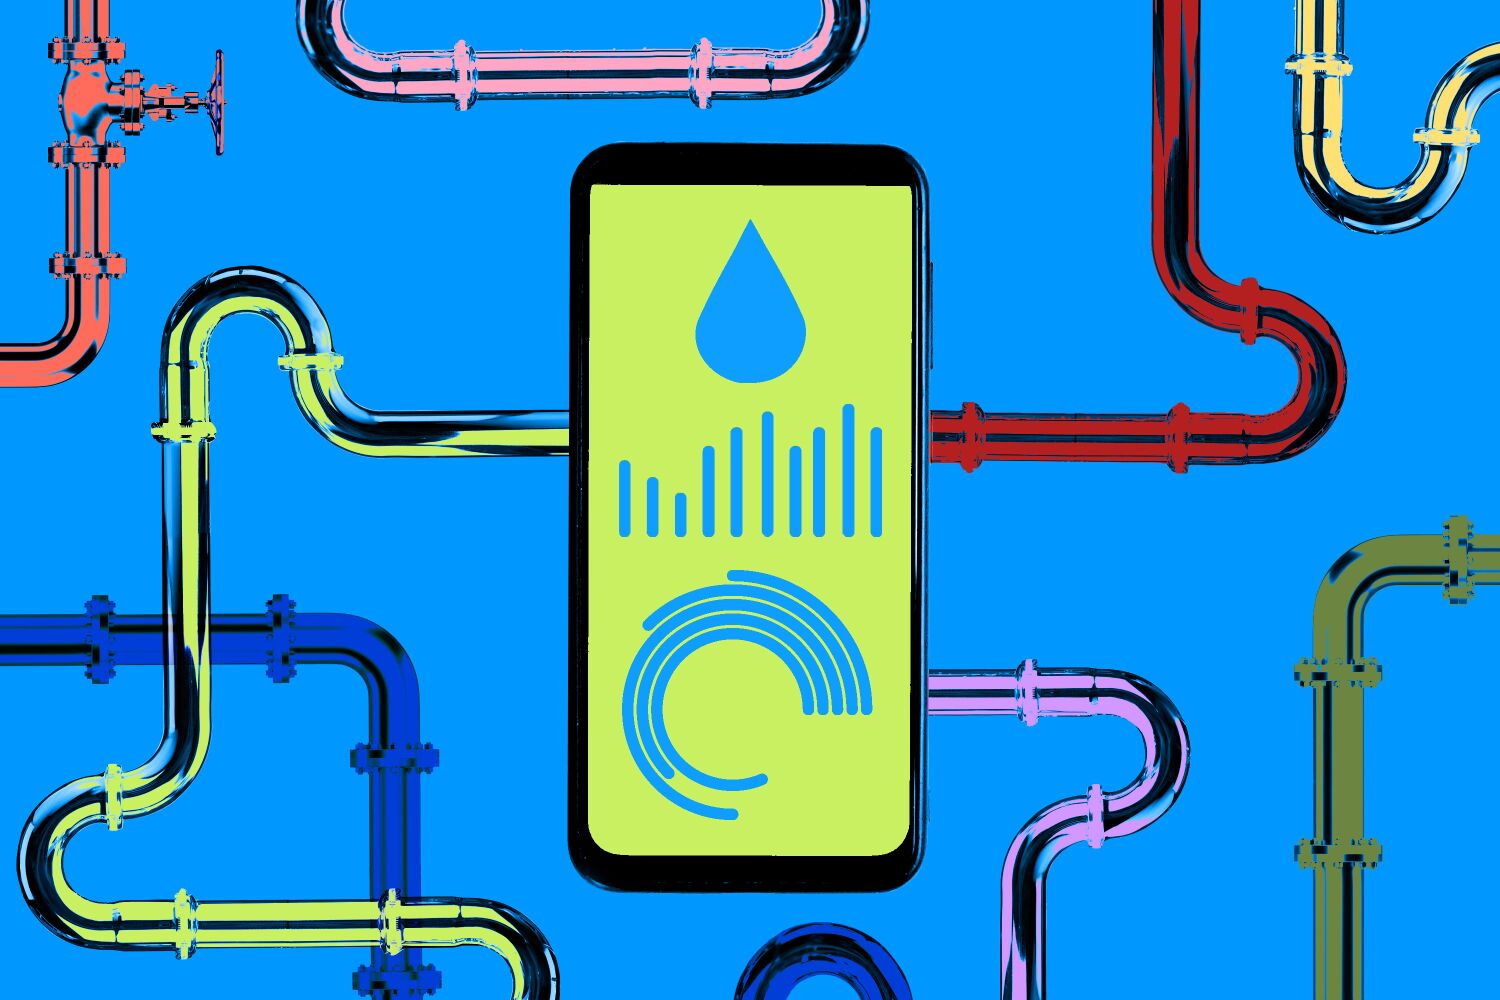 Can this $24 device help you be more water-wise? We decided to find out